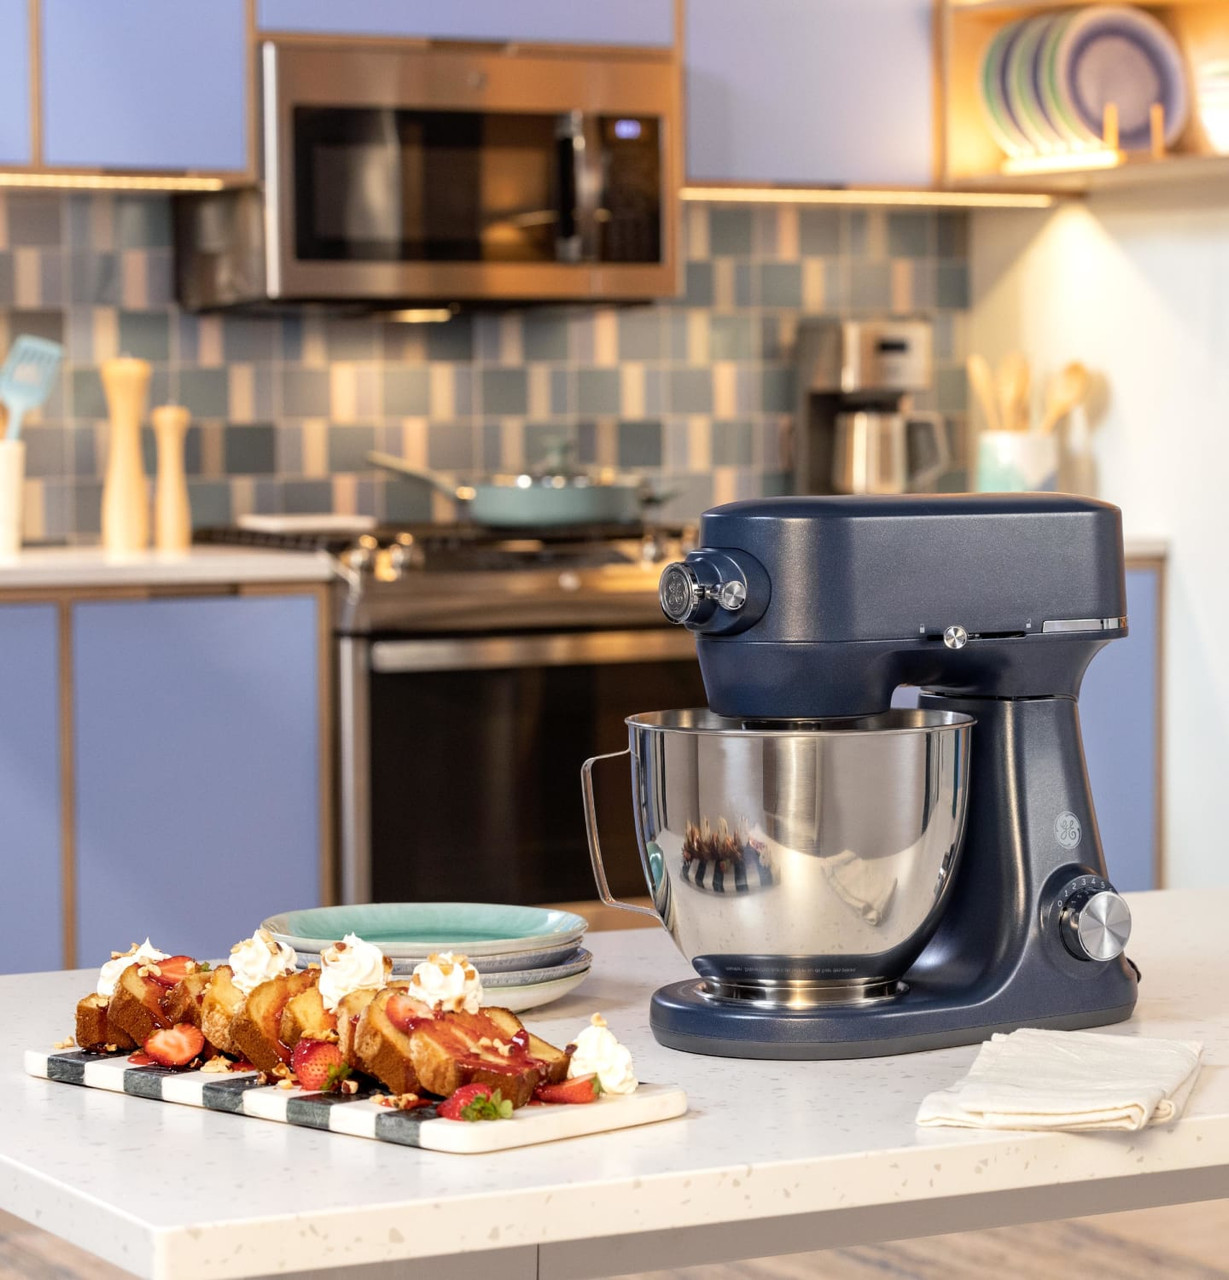 For Baking, One Stand Mixer Towers Above The Rest